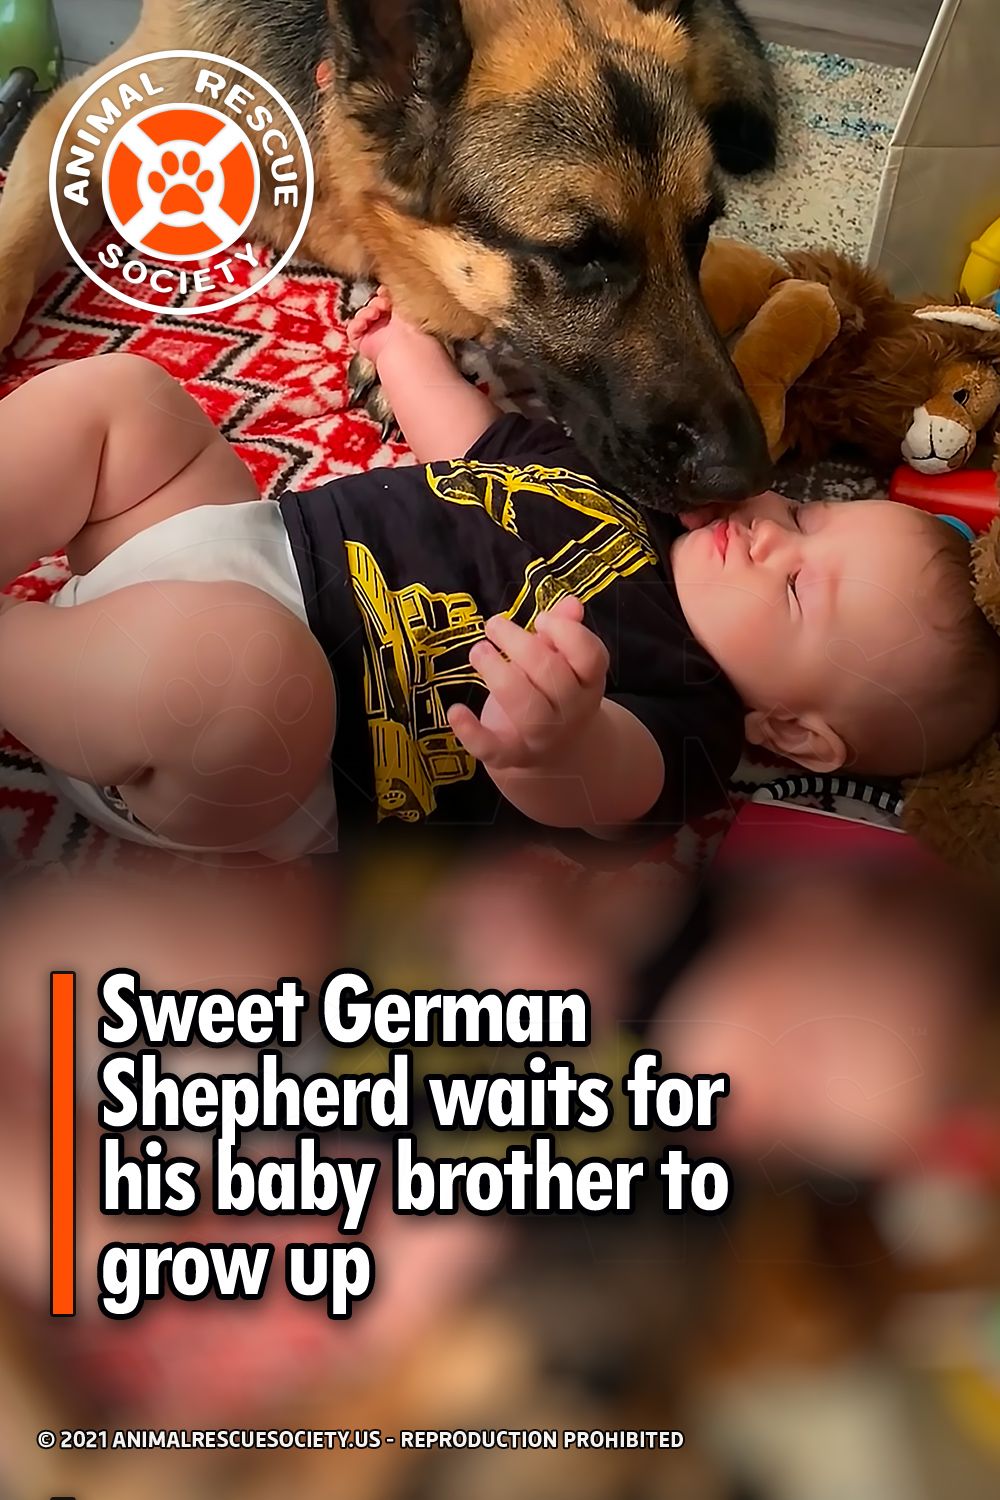 Sweet German Shepherd waits for his baby brother to grow up